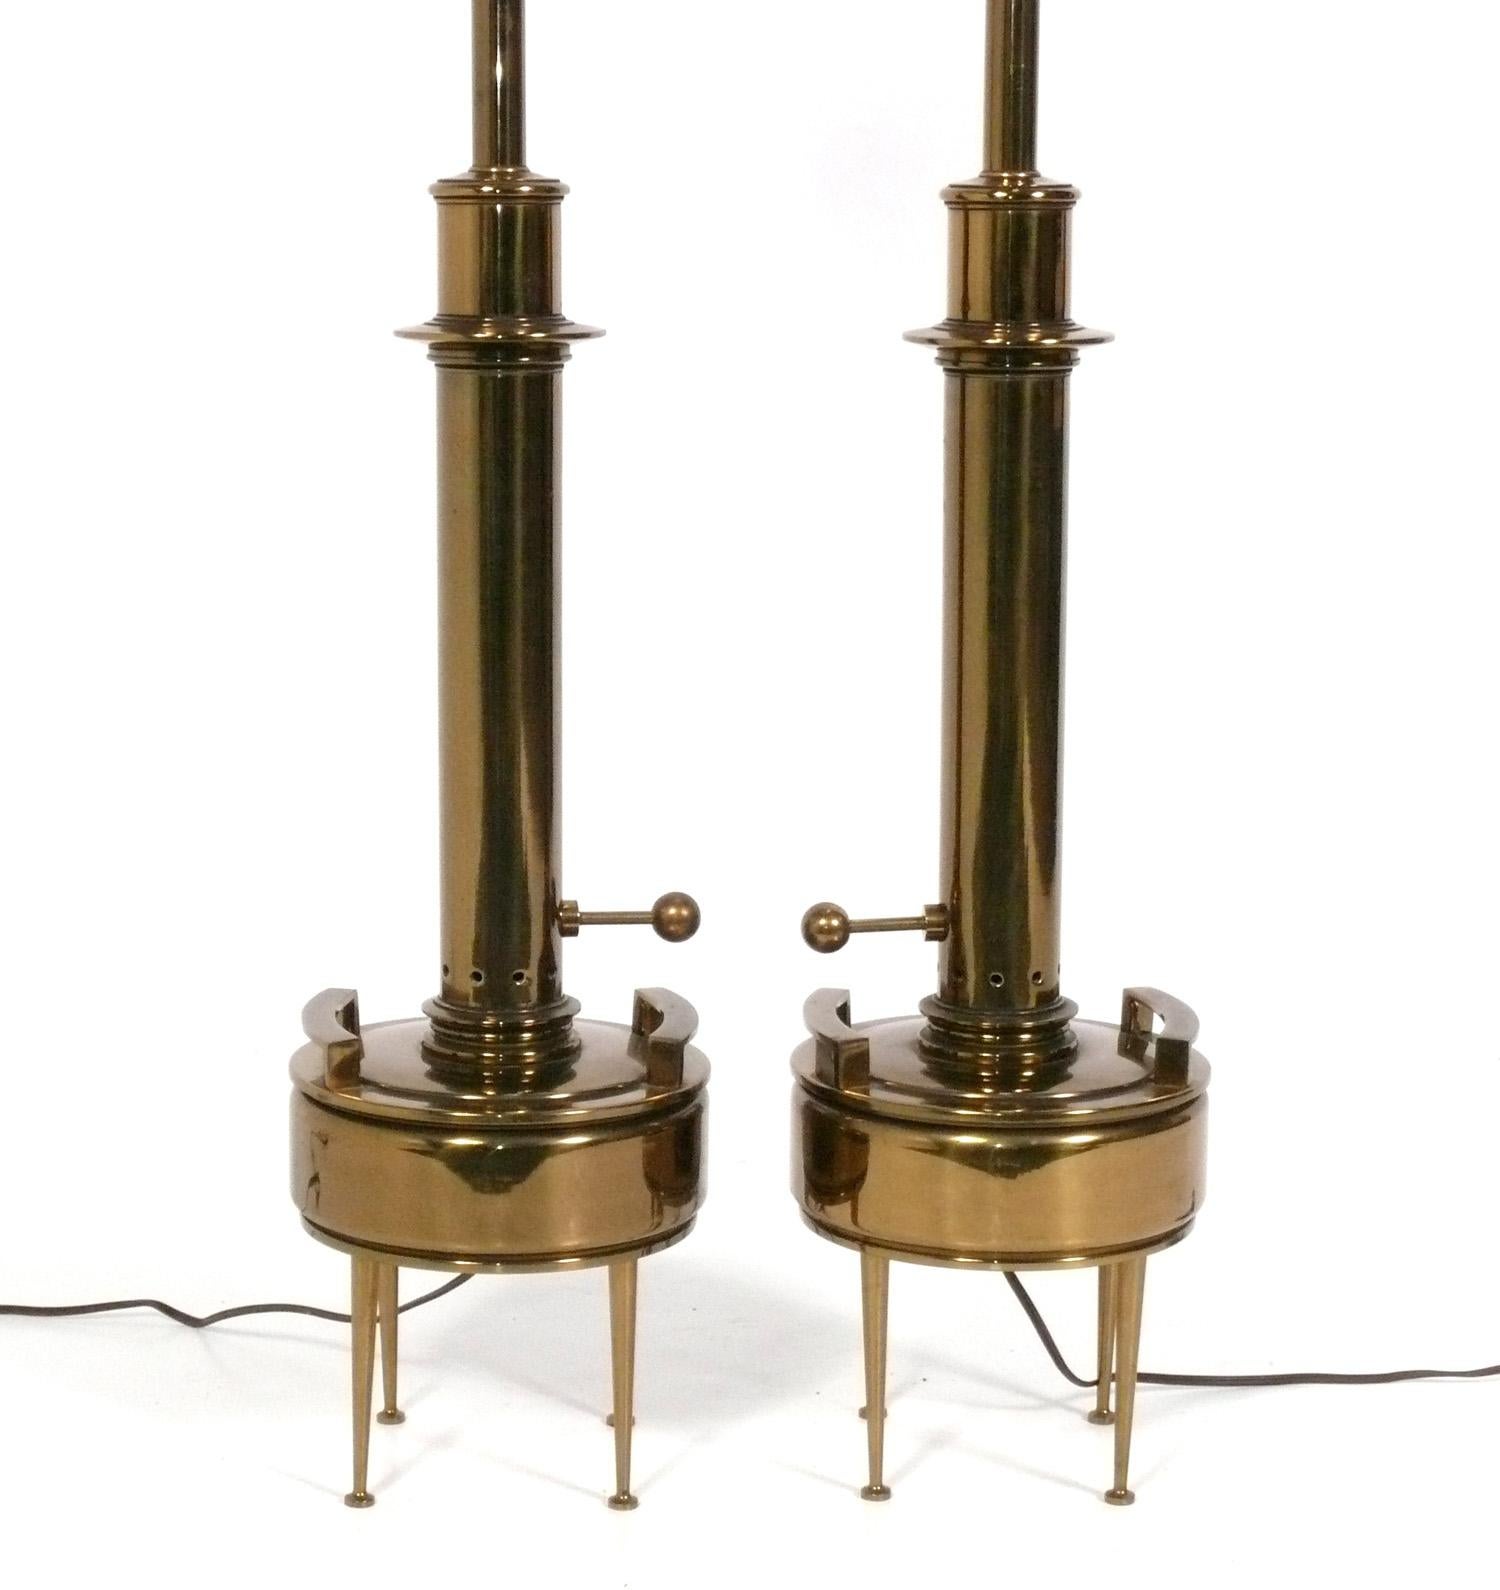 Pair of Sculptural Mid Century Modern Lamps, by Stiffel, American, circa 1950s. They retain their original shades and brass finials. They have been rewired and are ready to use. 